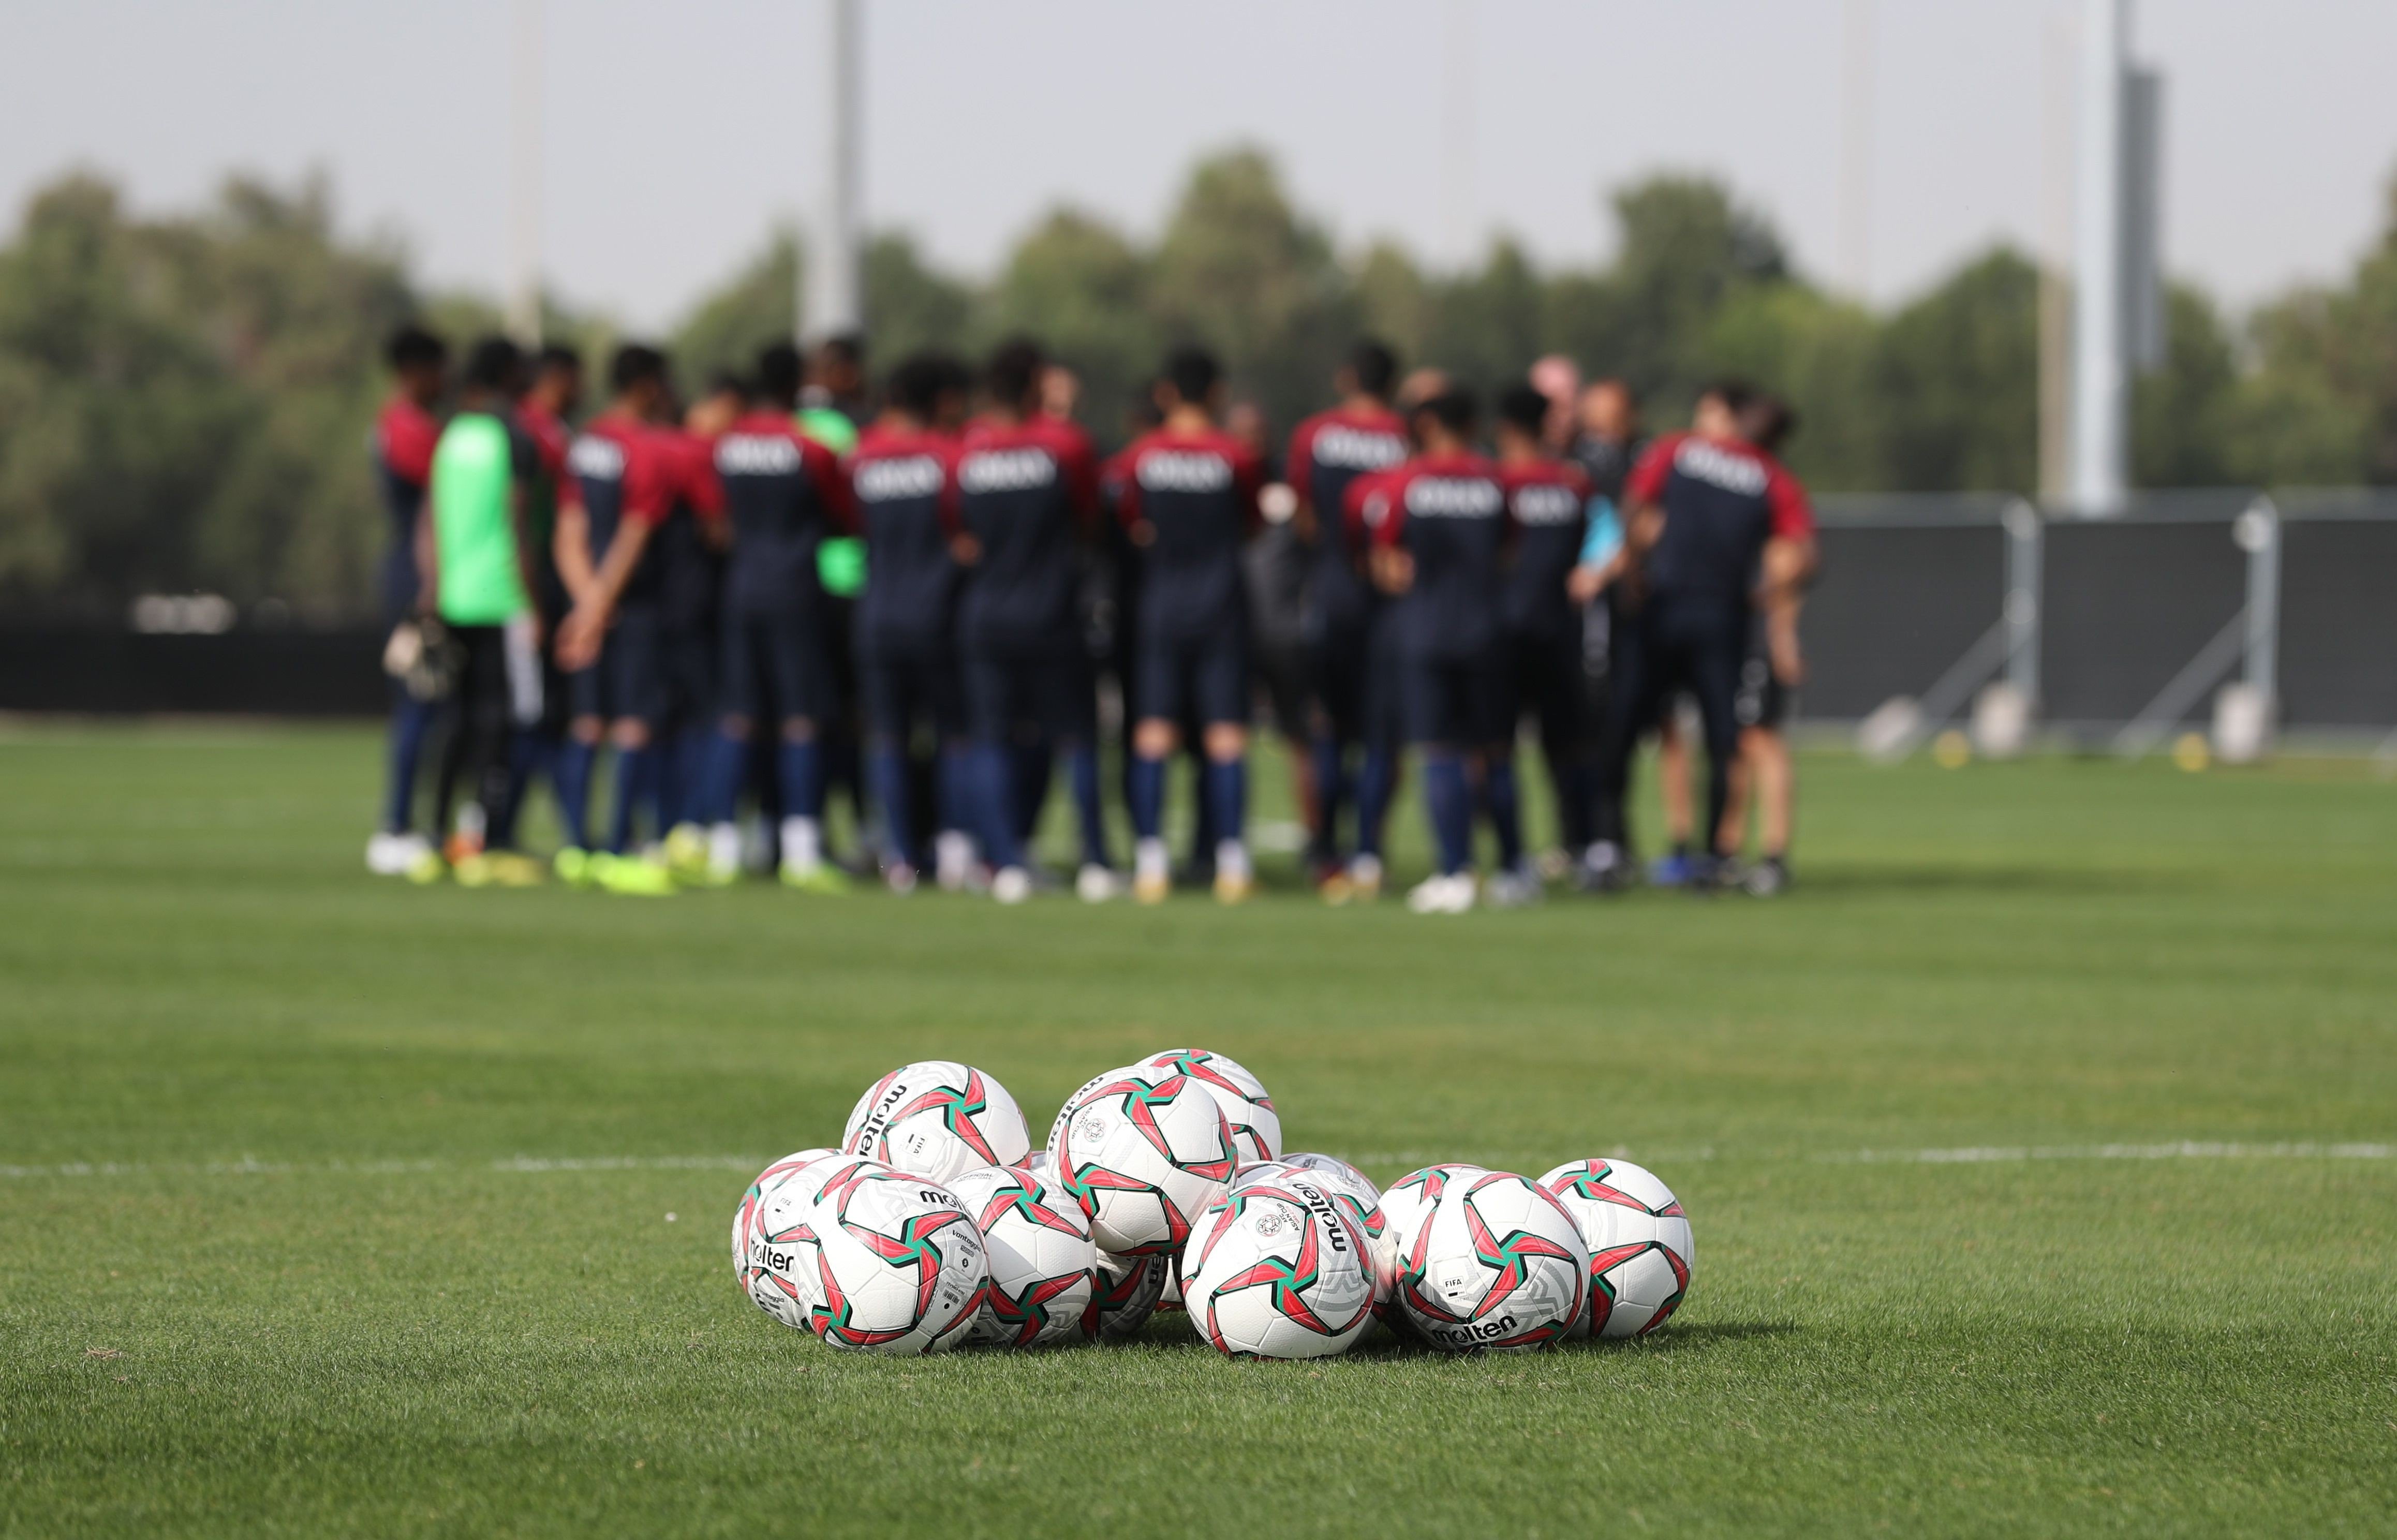 Oman's football team participates in a training session in the Emirati capital Abu Dhabi ahead of the AFC Asian Cup. Photo: AFP